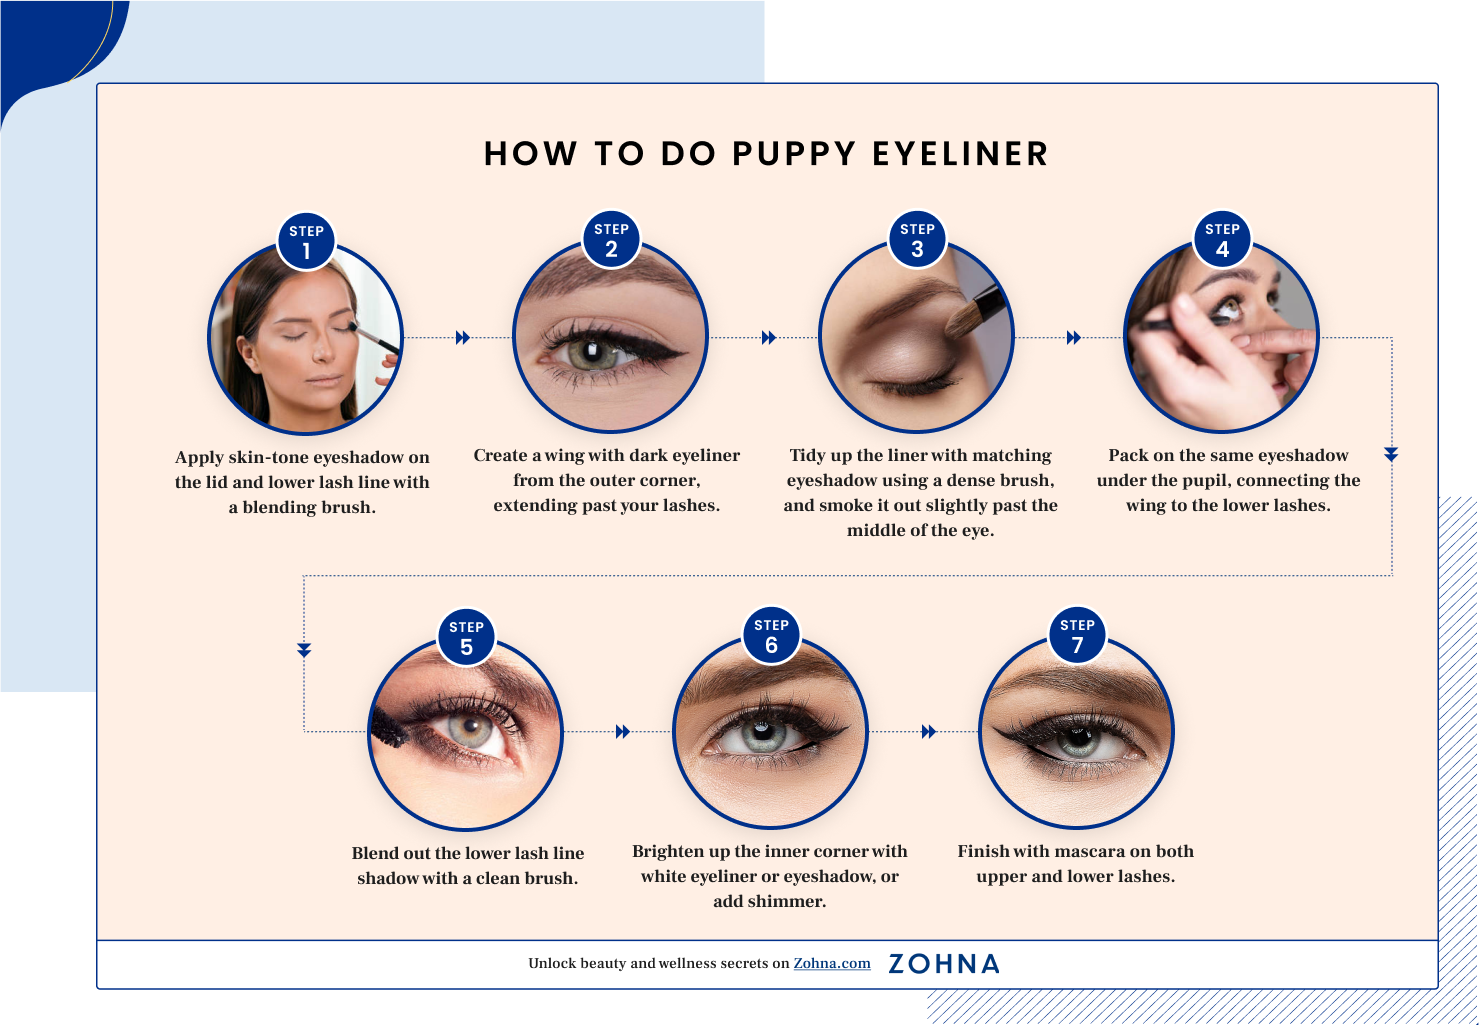 How to Do Puppy Eyeliner